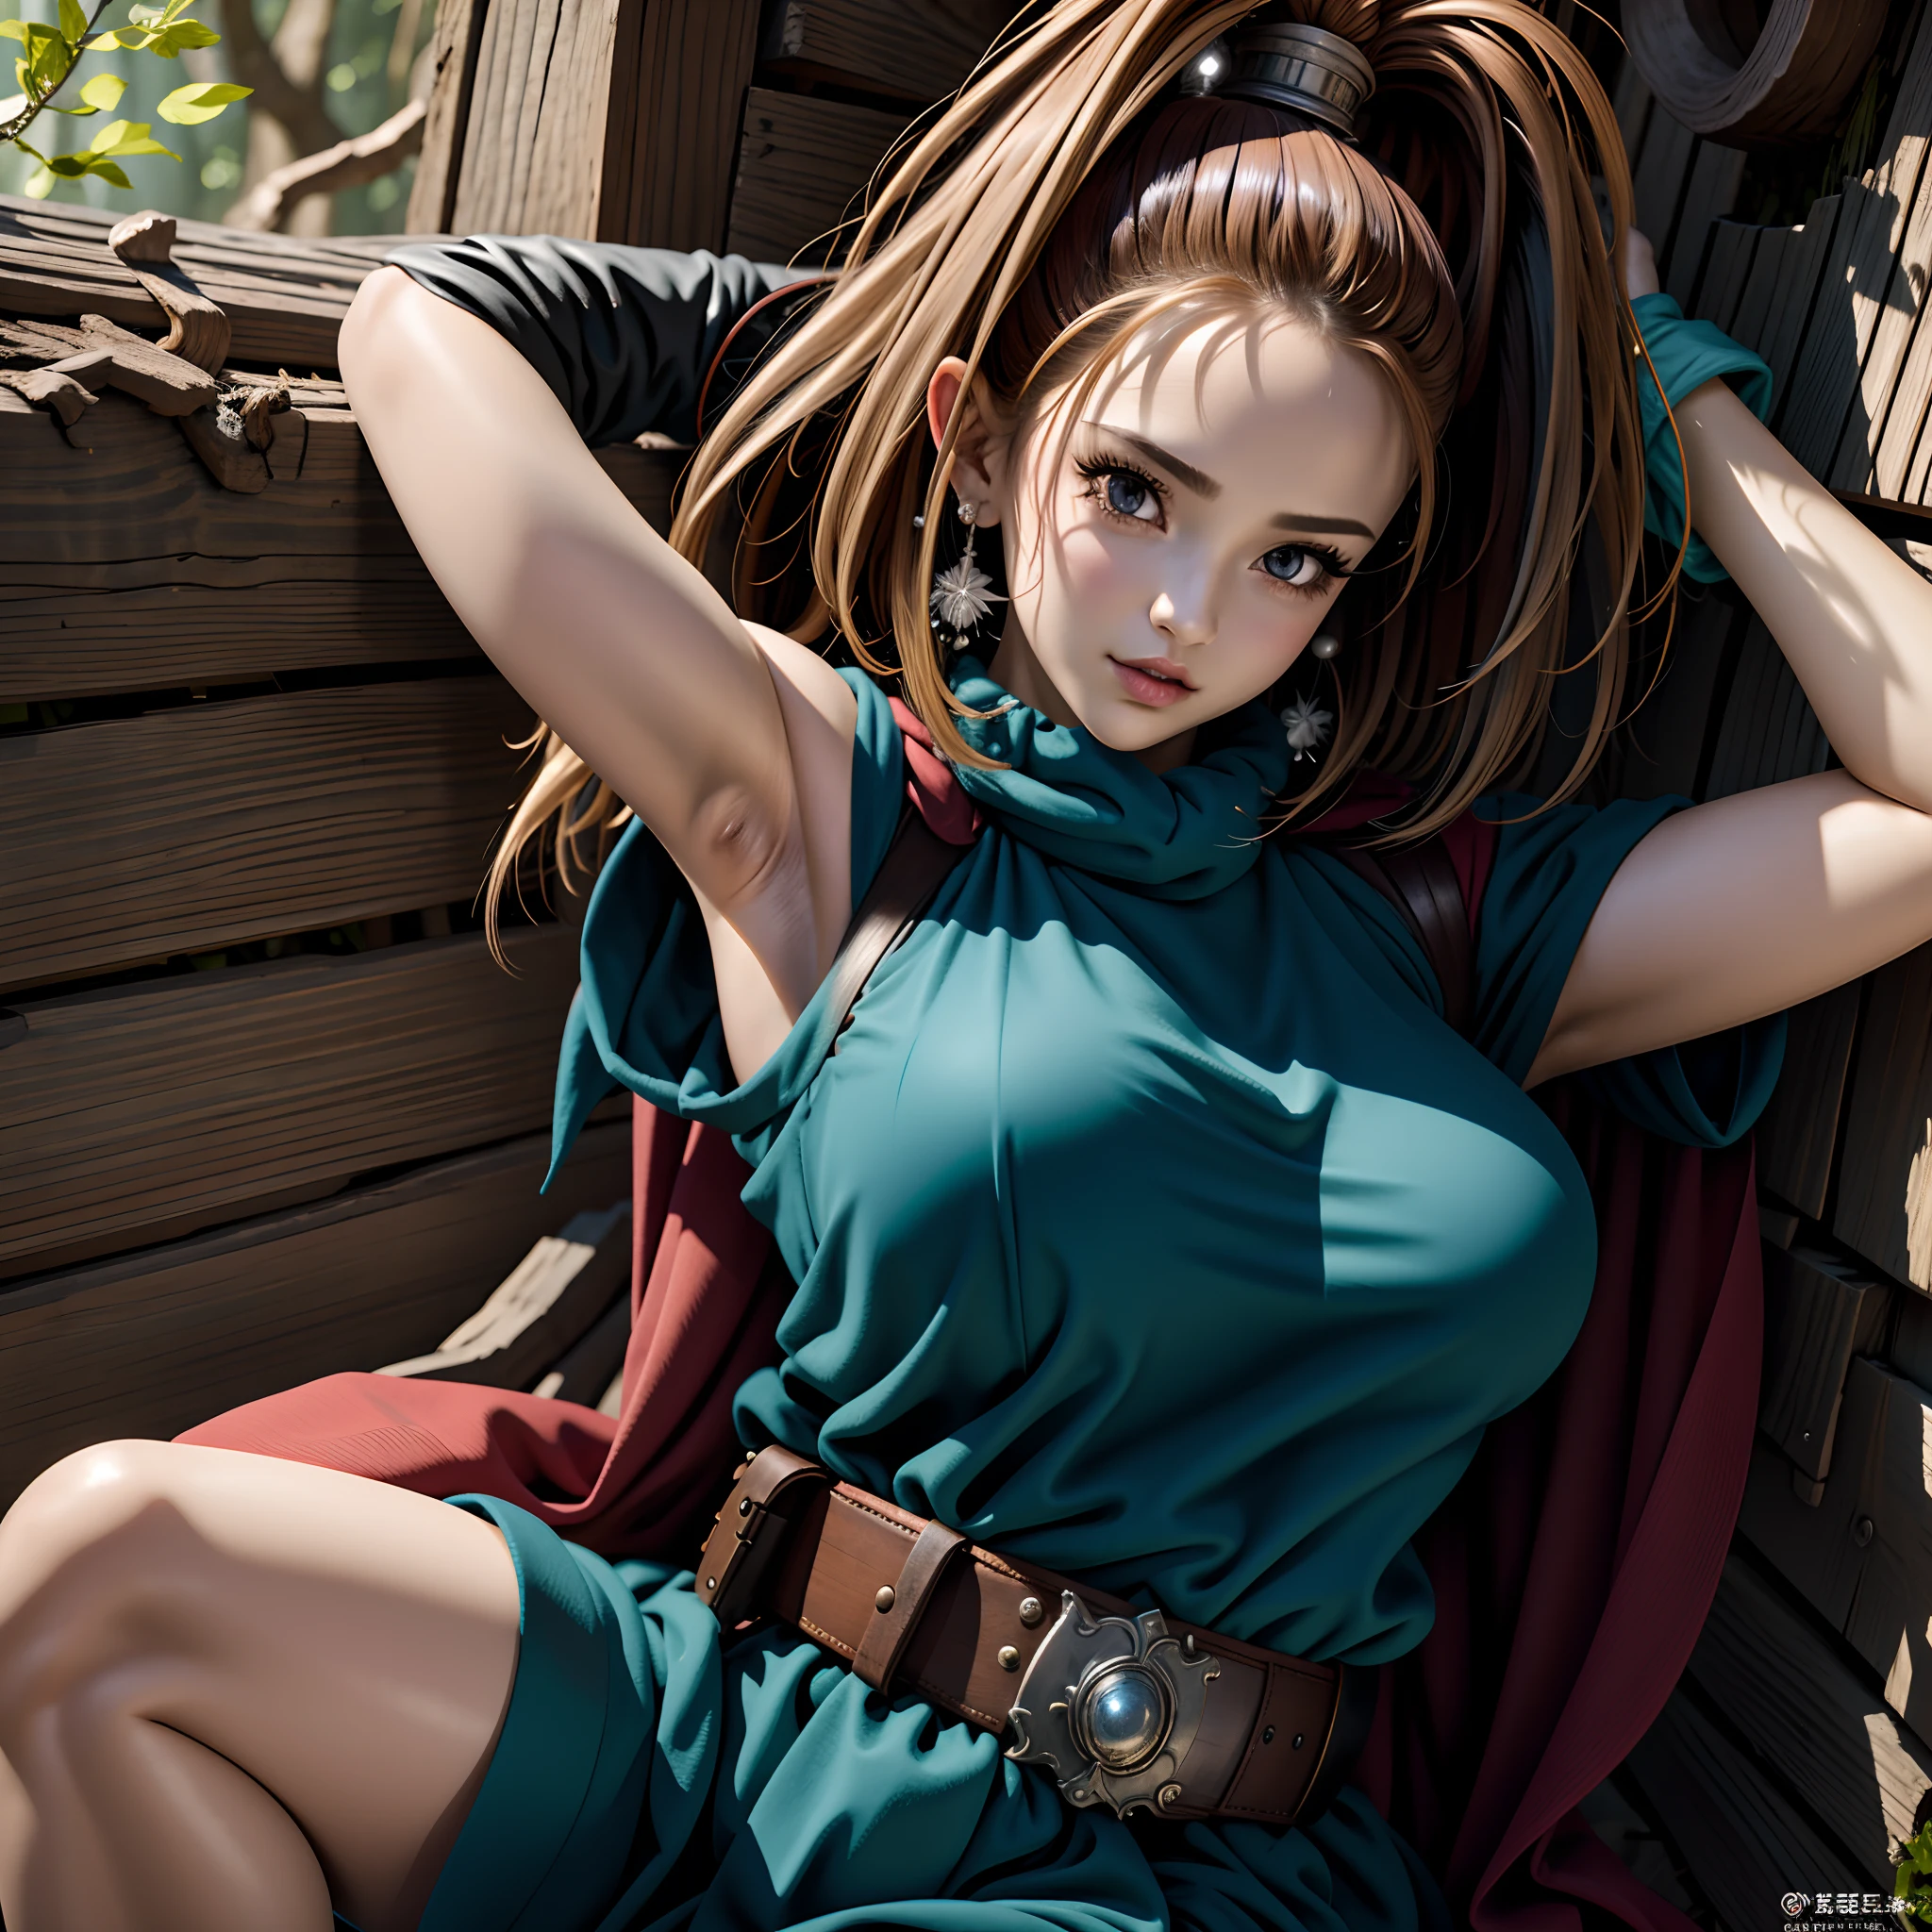 (masutepiece, Best Quality, 32 HDR, High resolution), (1womanl:2.0, Solo:2.0, 1character:2.0), (DQ6 Barbara, High Ponytail, Dress, Cape, yellow gloves, Belt bag, Jewelry, earrings), (Colossal tits:1.15, Huge boobs:1.15, Huge breasts:1.15), Highly detailed, (Exposed shaved armpits:1.25, in the abandoned house:1.1, in a deep forest), hyperdetailed face, ultra detailed skin texture,